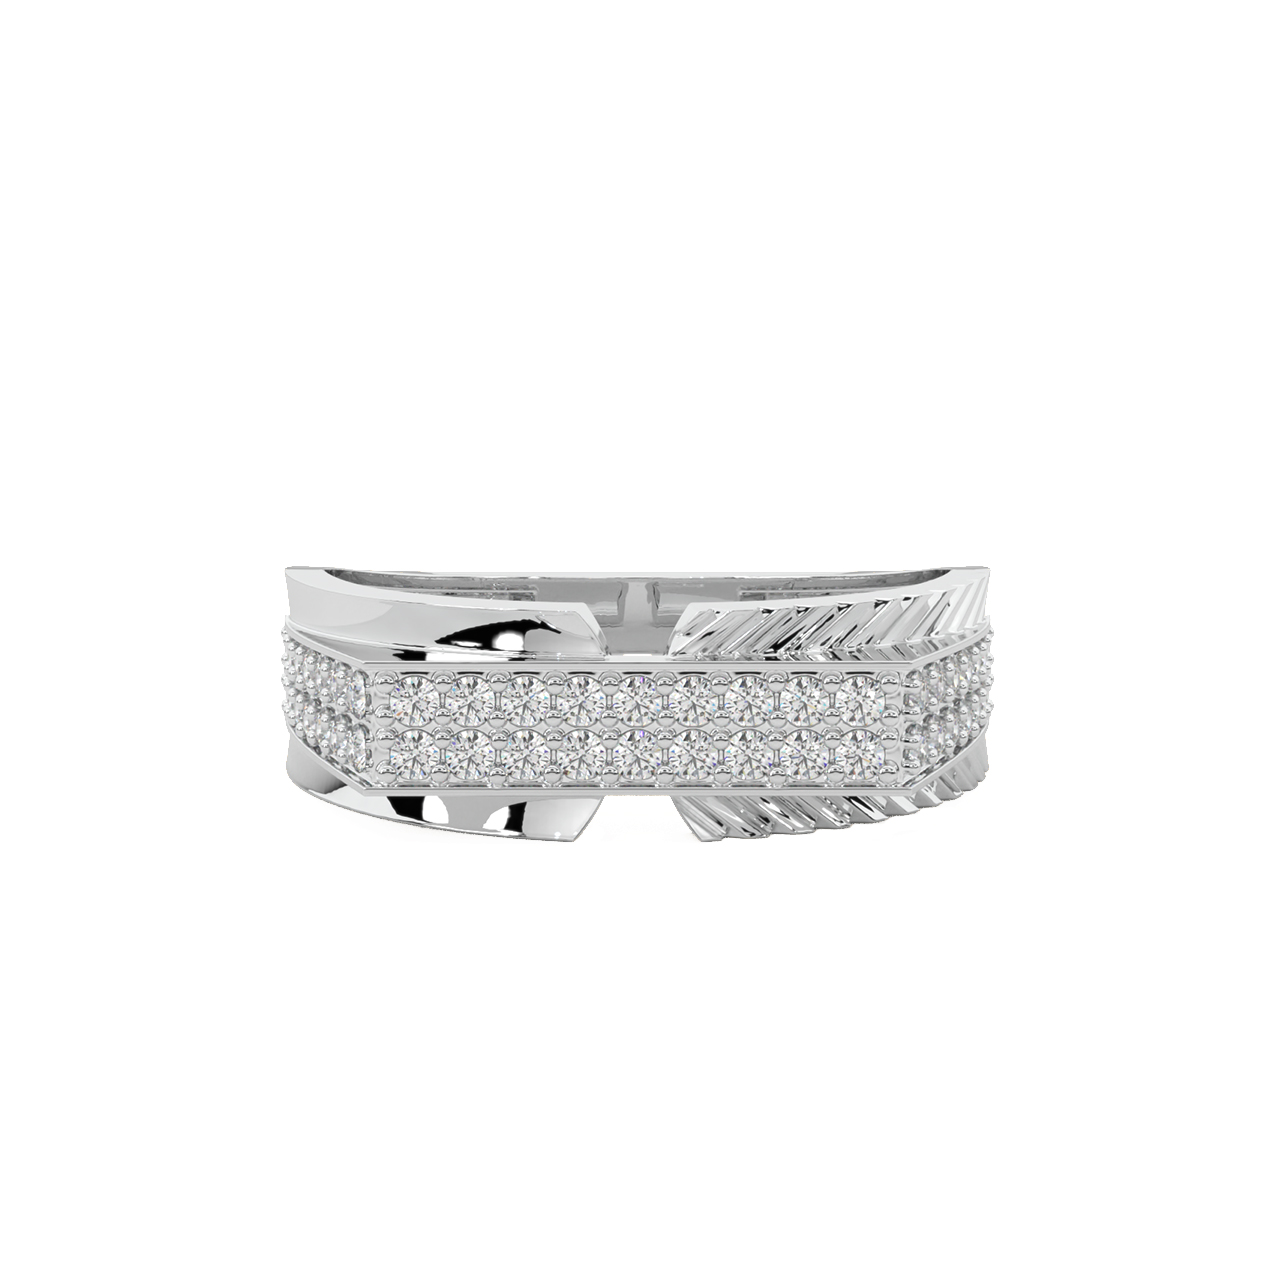 Robby Round Diamond Ring For Him